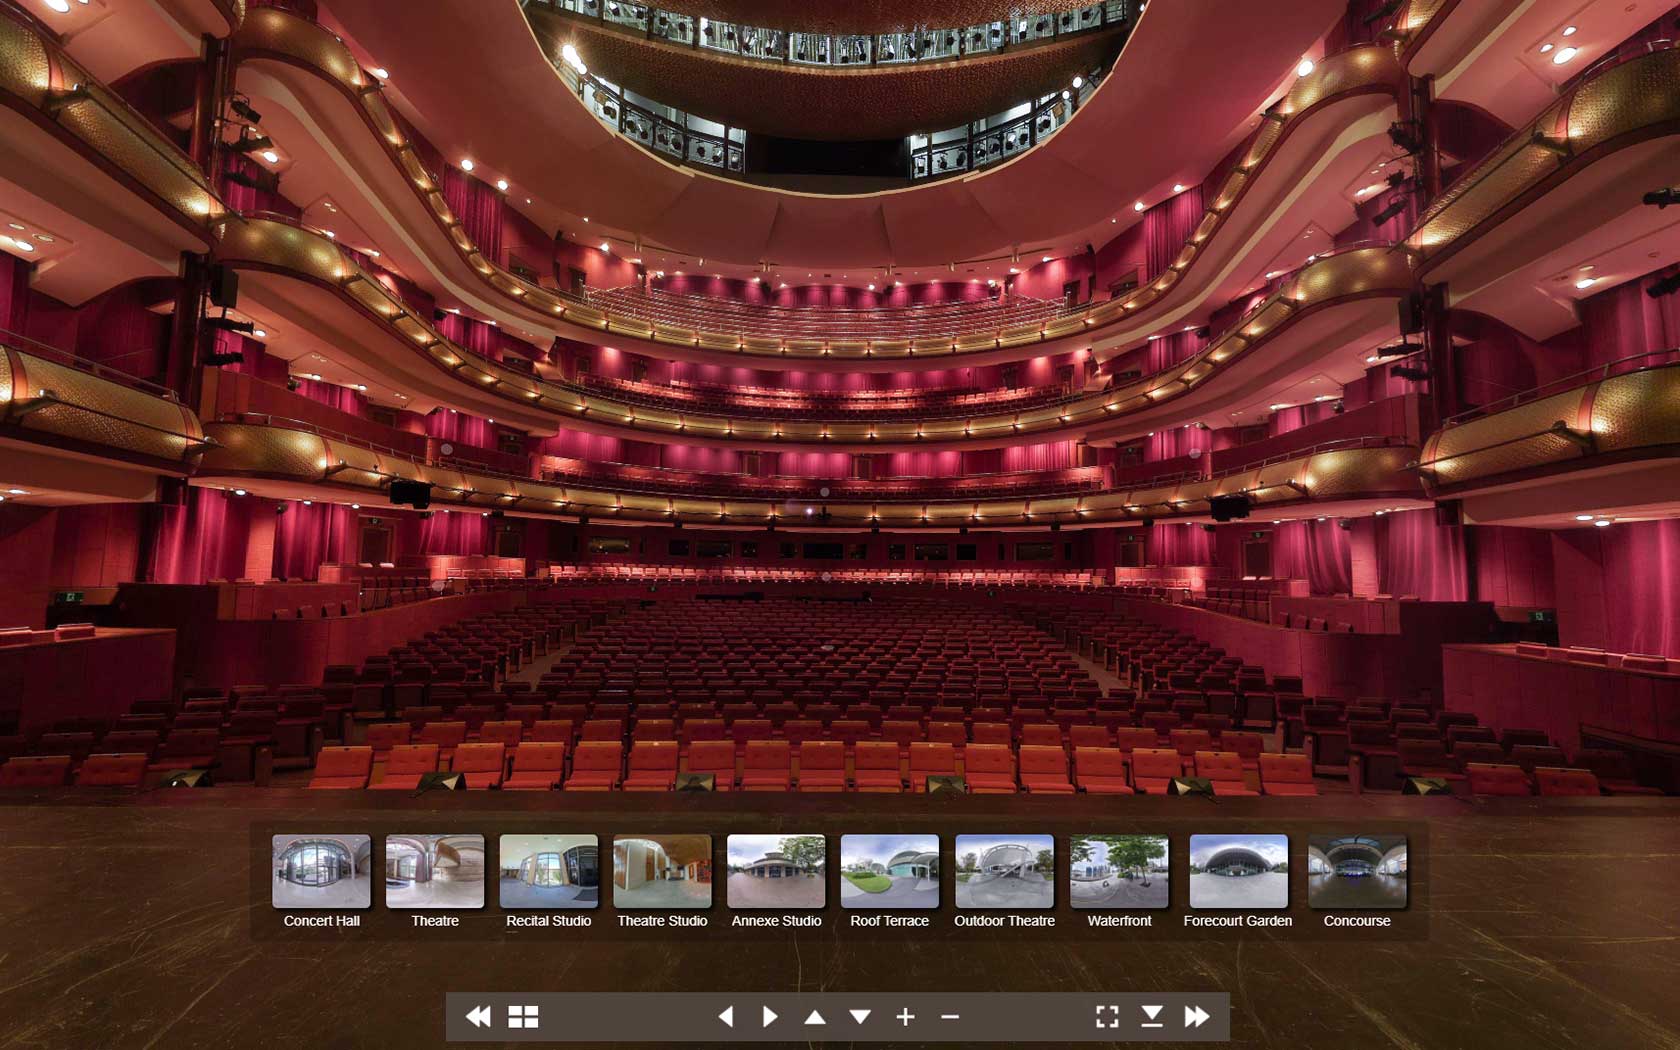 View of audience seats in Esplanade Theatre taken from the stage as part of the virtual tour